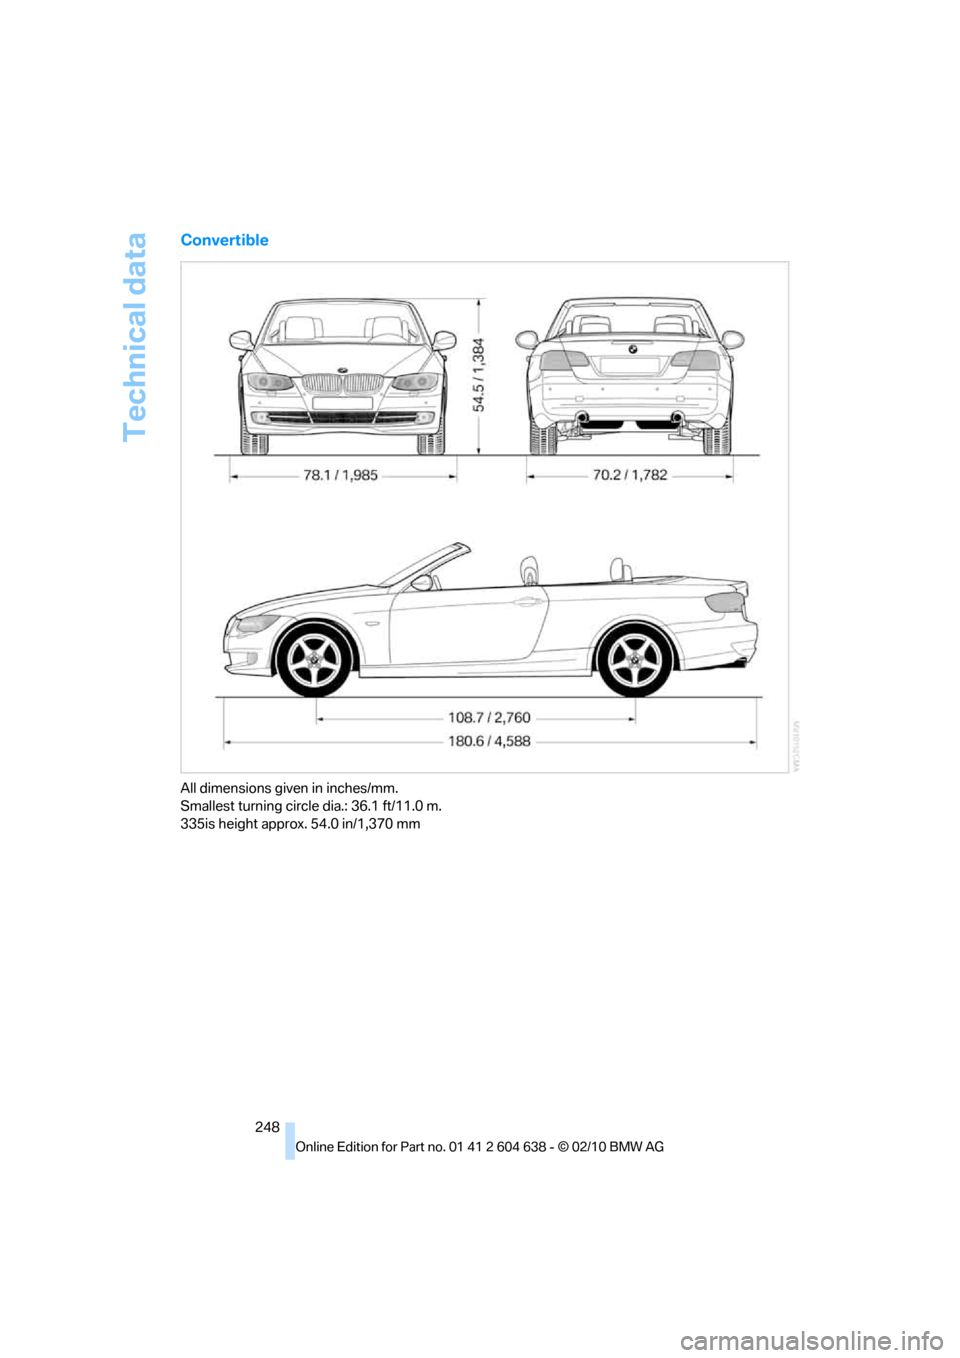 BMW M3 COUPE 2011 E92 Owners Manual Technical data
248
Convertible
All dimensions given in inches/mm. 
Smallest turning circle dia.: 36.1 ft/11.0 m.
335is height approx. 54.0 in/1,370 mm 